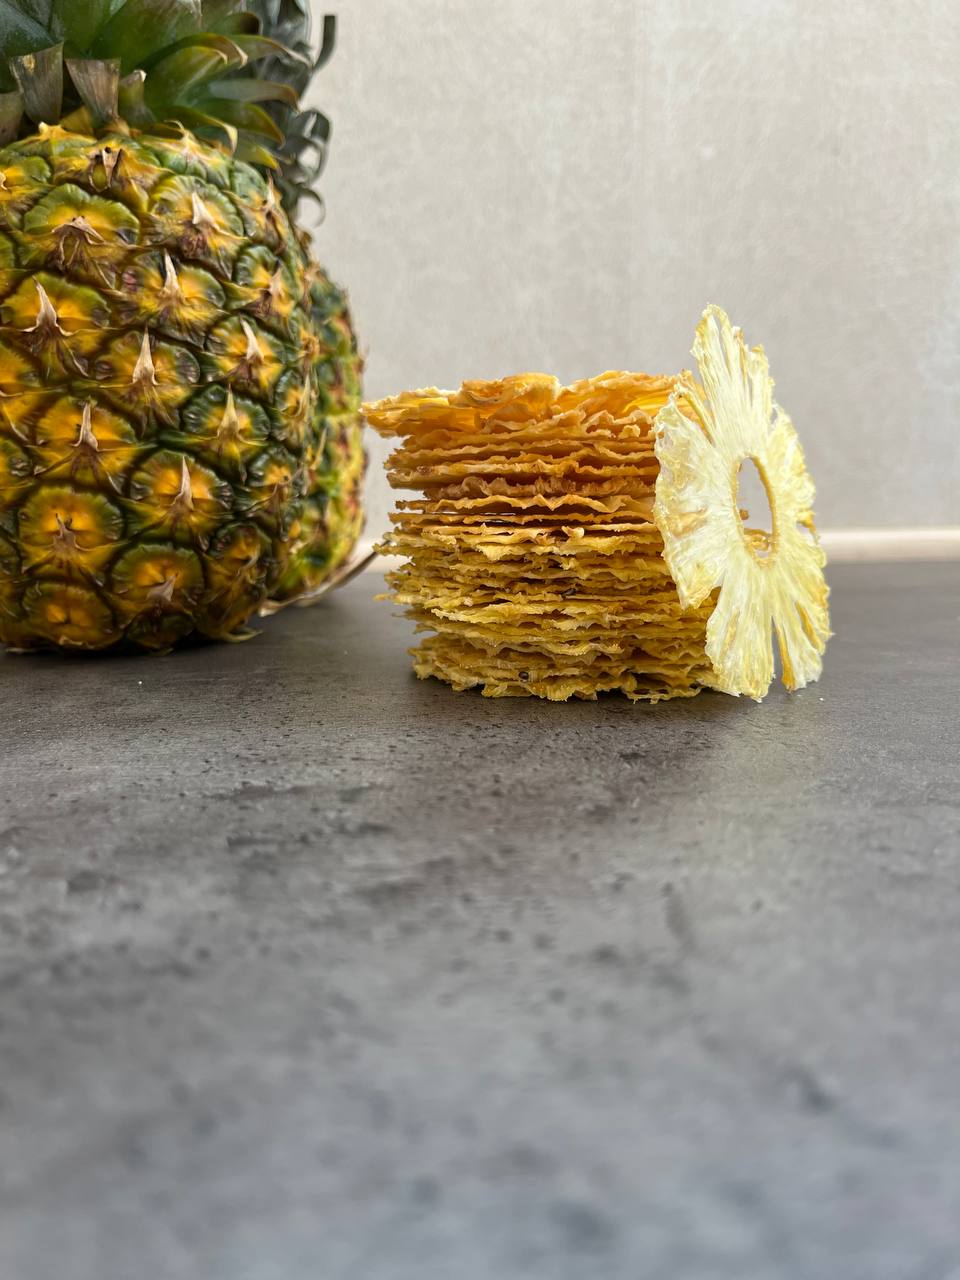 Dried Organic Pineapple Slices, 100% Natural, No Sugar Added